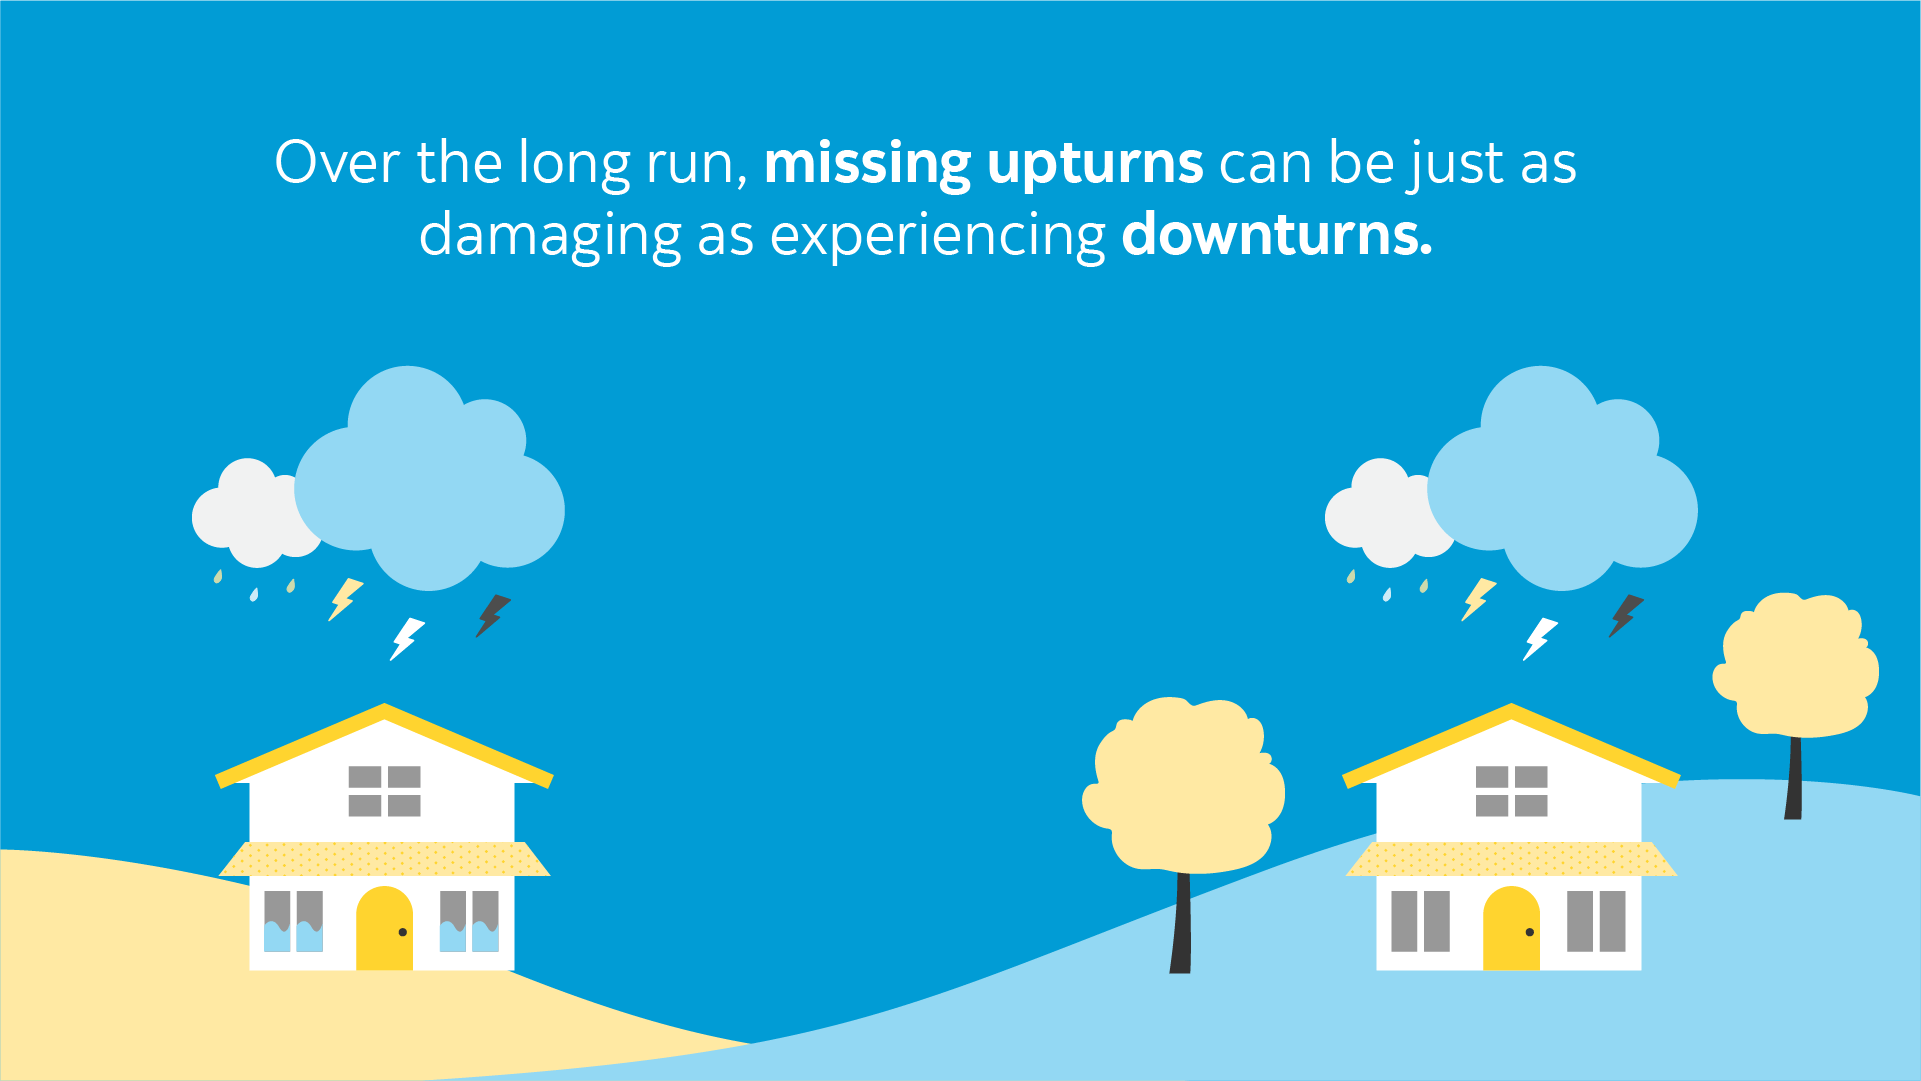 Over the long run, missing upturns can be just as damaging as experiencing downturns 